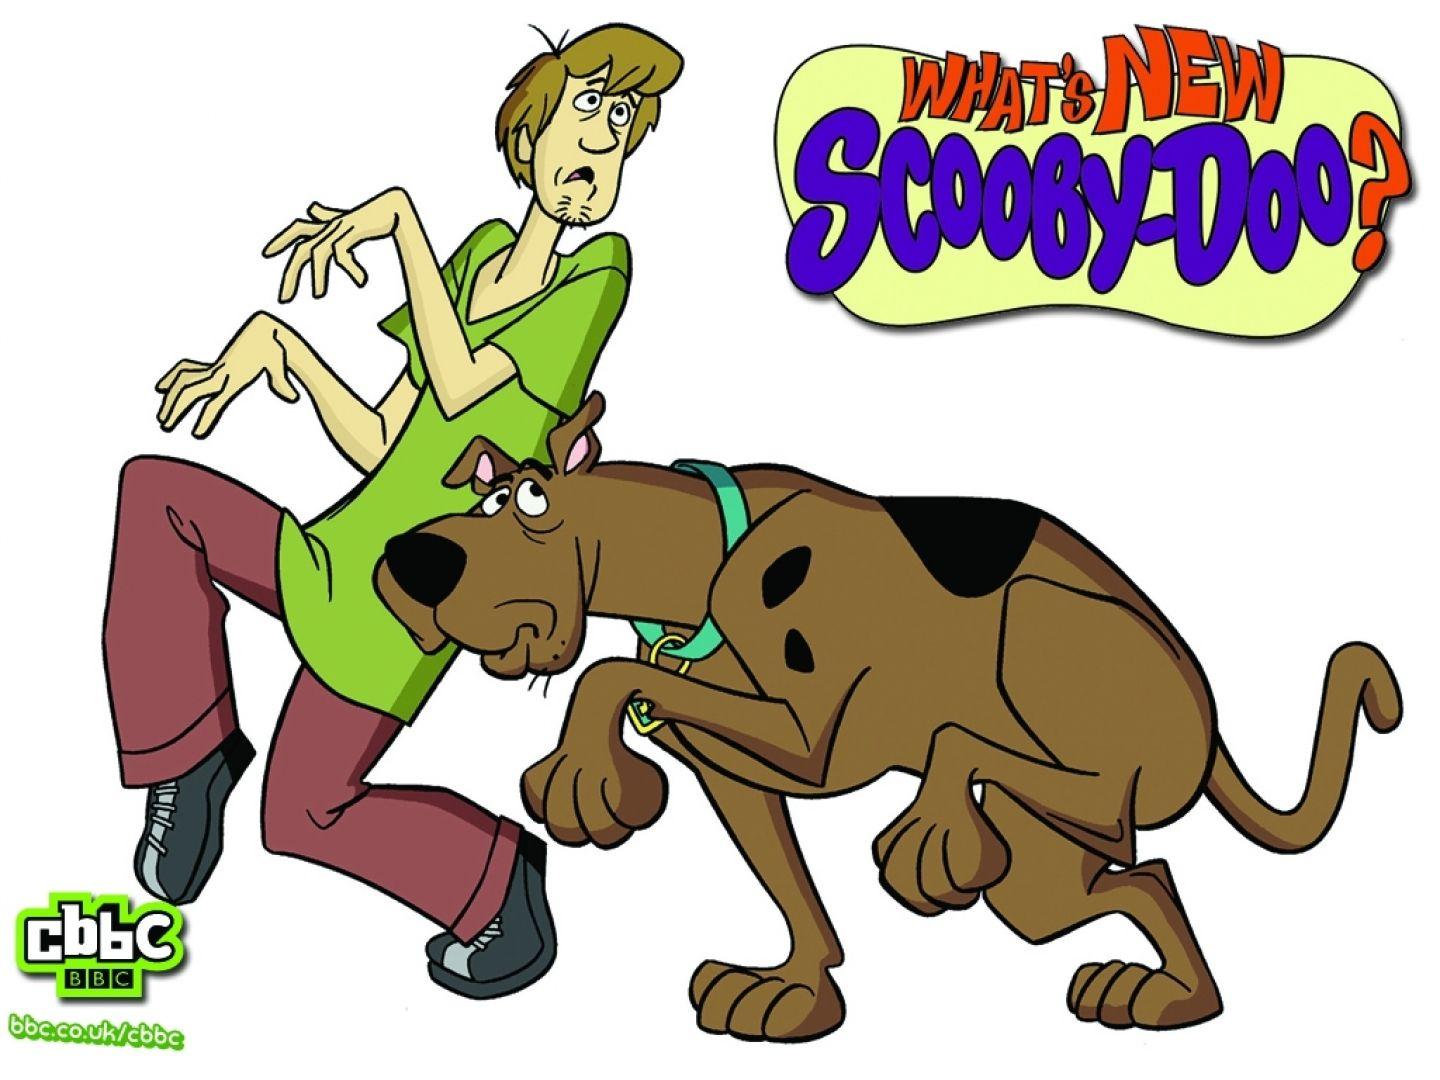 Scooby Doo and Shaggy Wallpapers for iPhone.